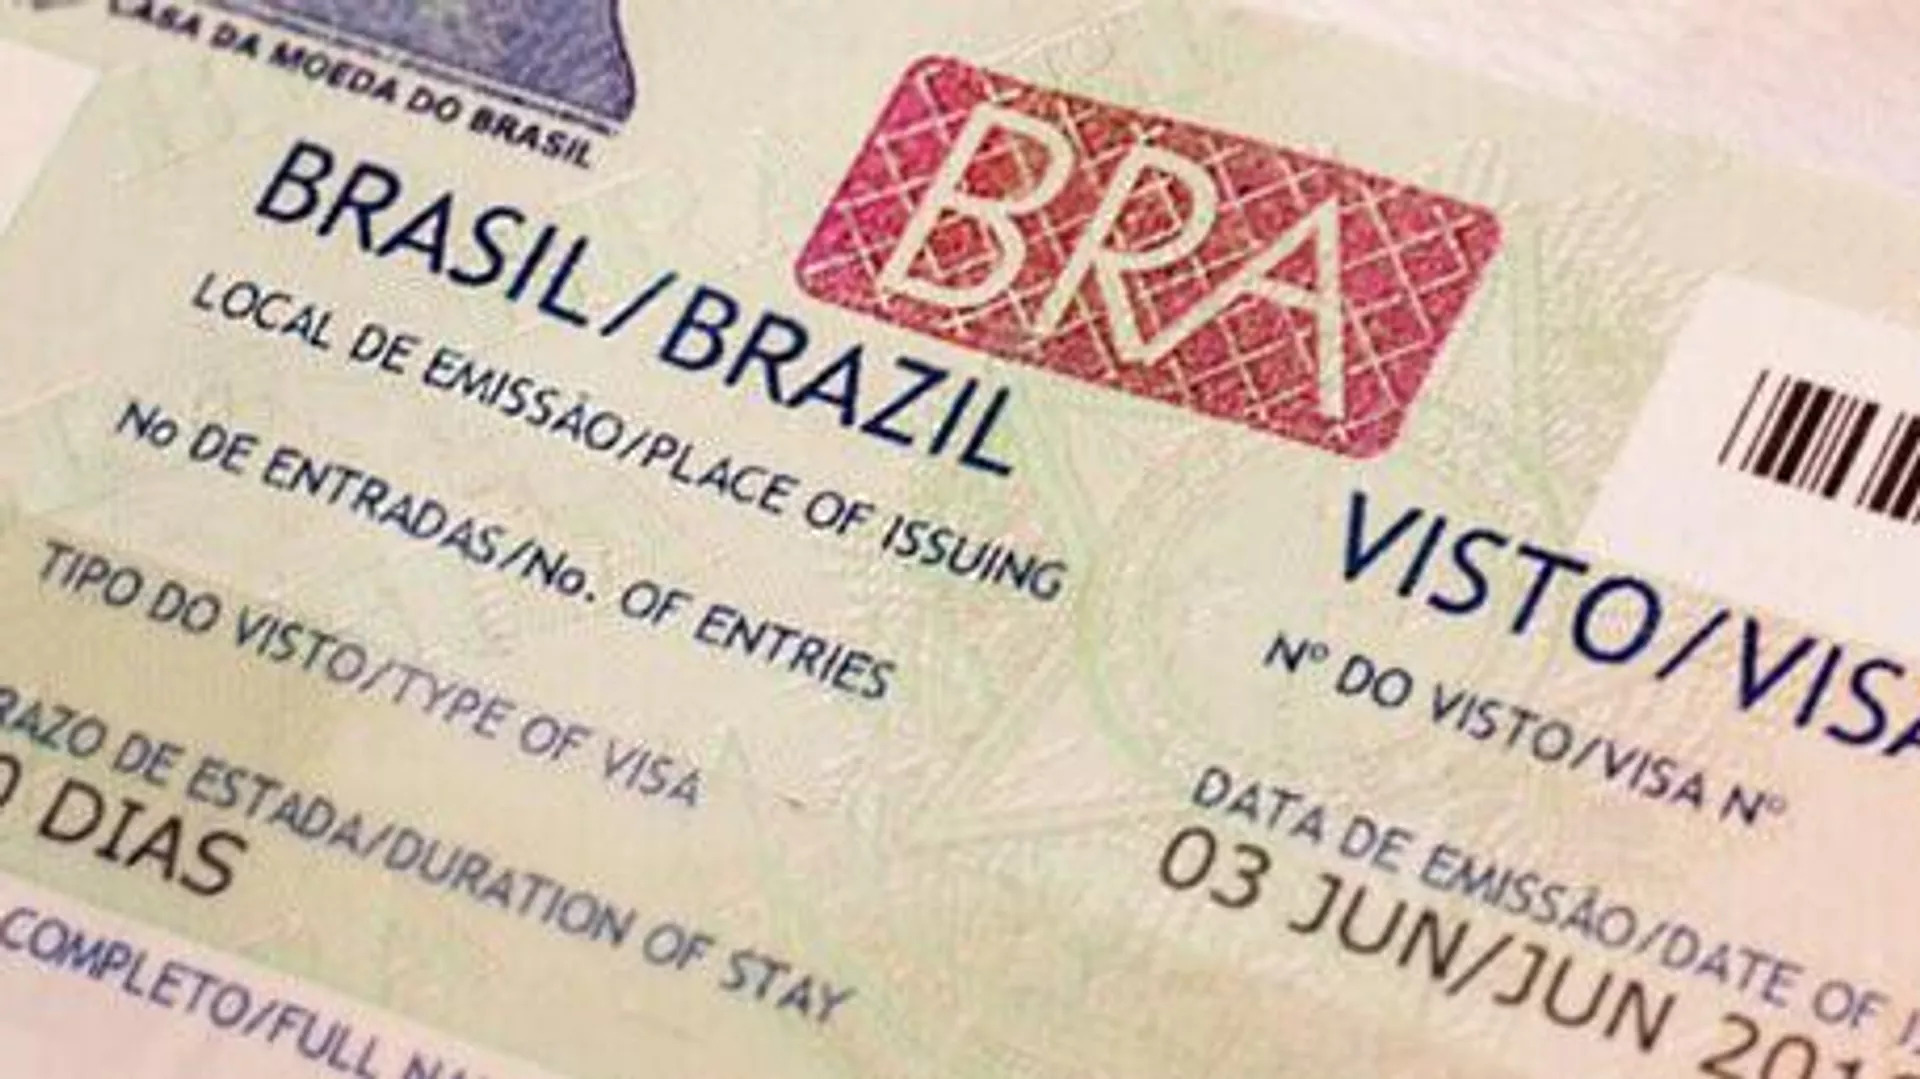  Mexico and Brazil introduce electronic visas for reciprocal travel. (Photo Internet reproduction)